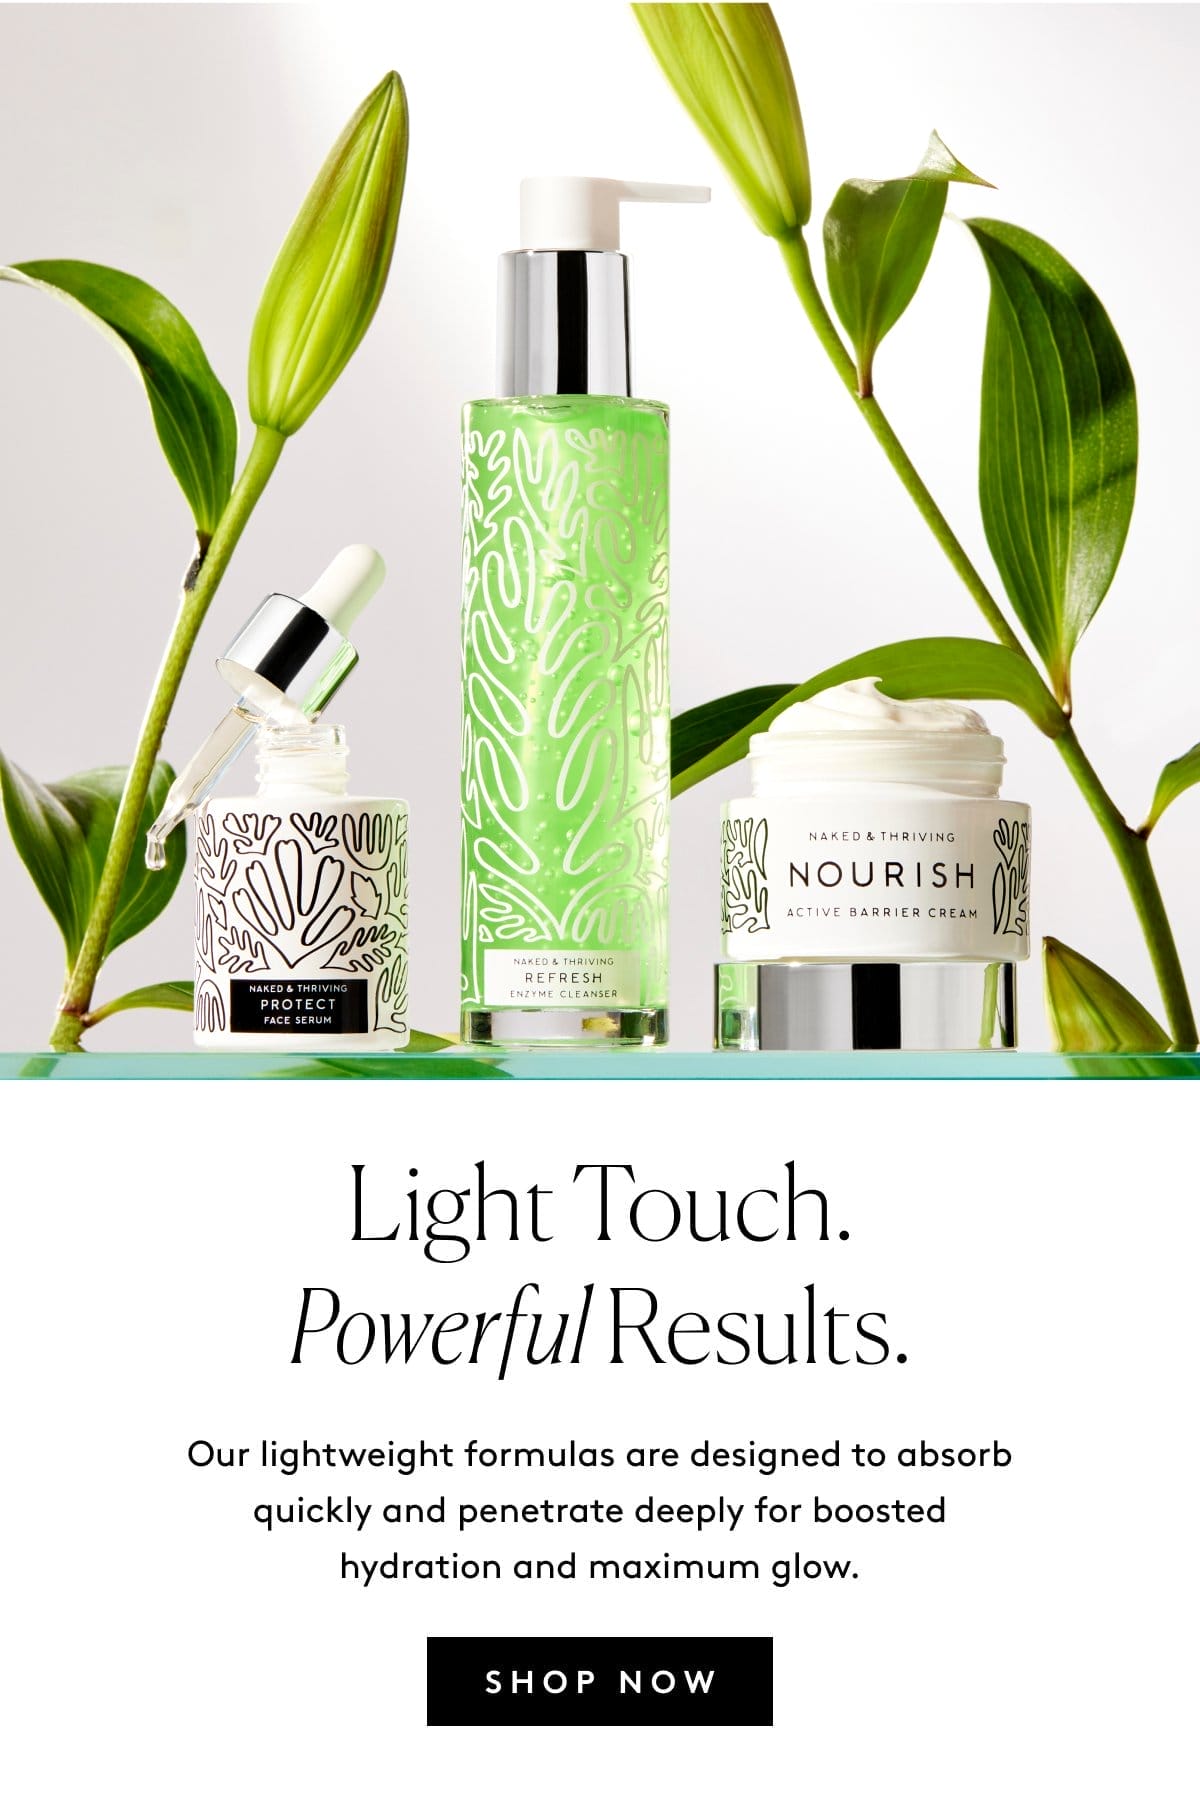 Light Touch. Powerful Results.